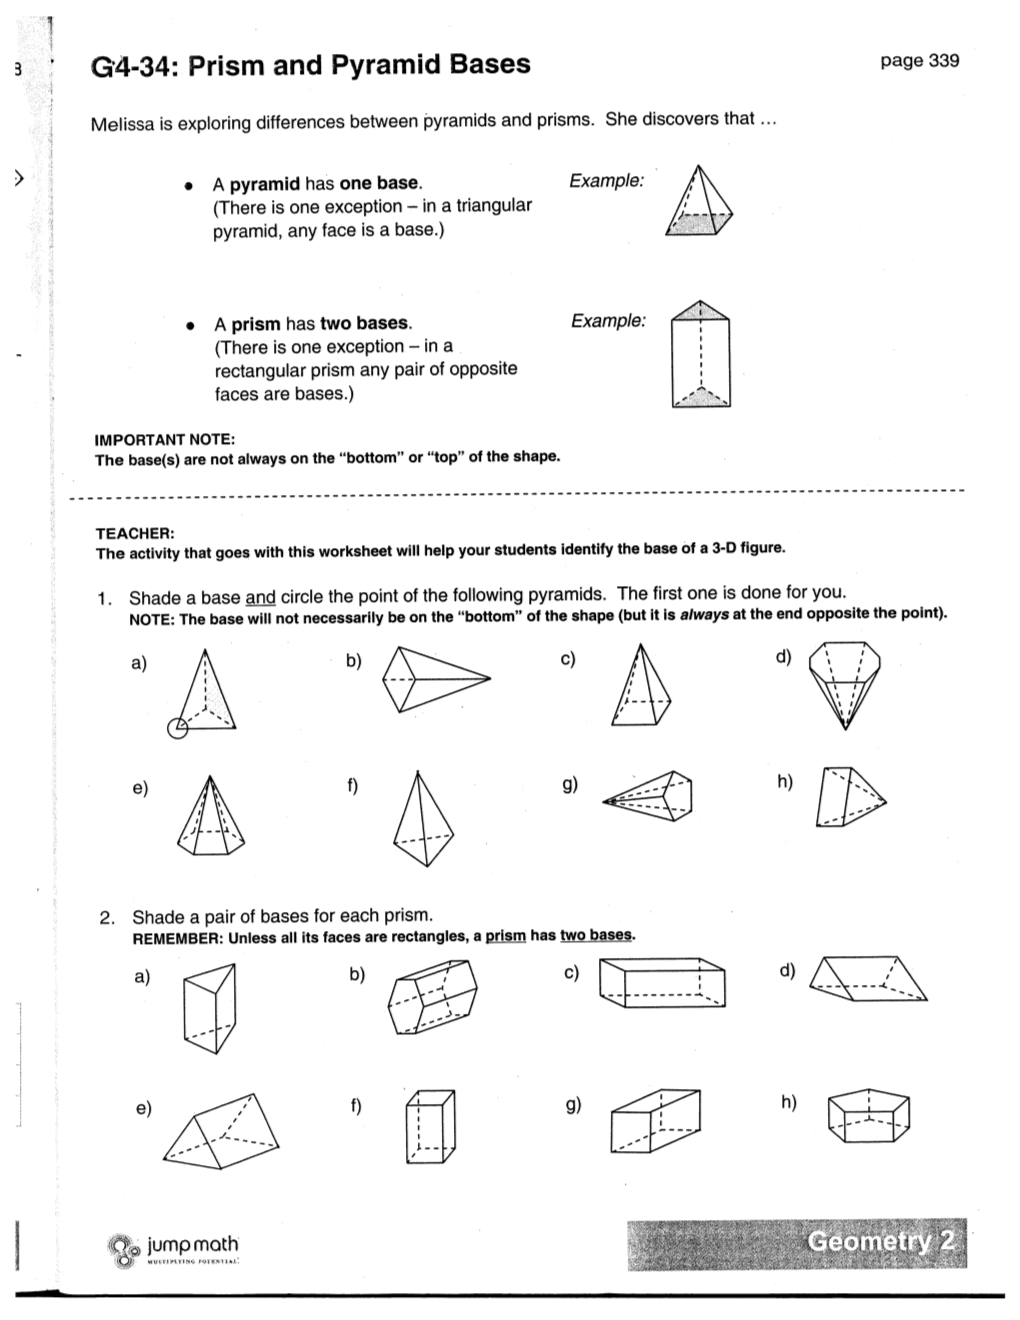 G4-34: Prism and Pyramid Bases Page 339